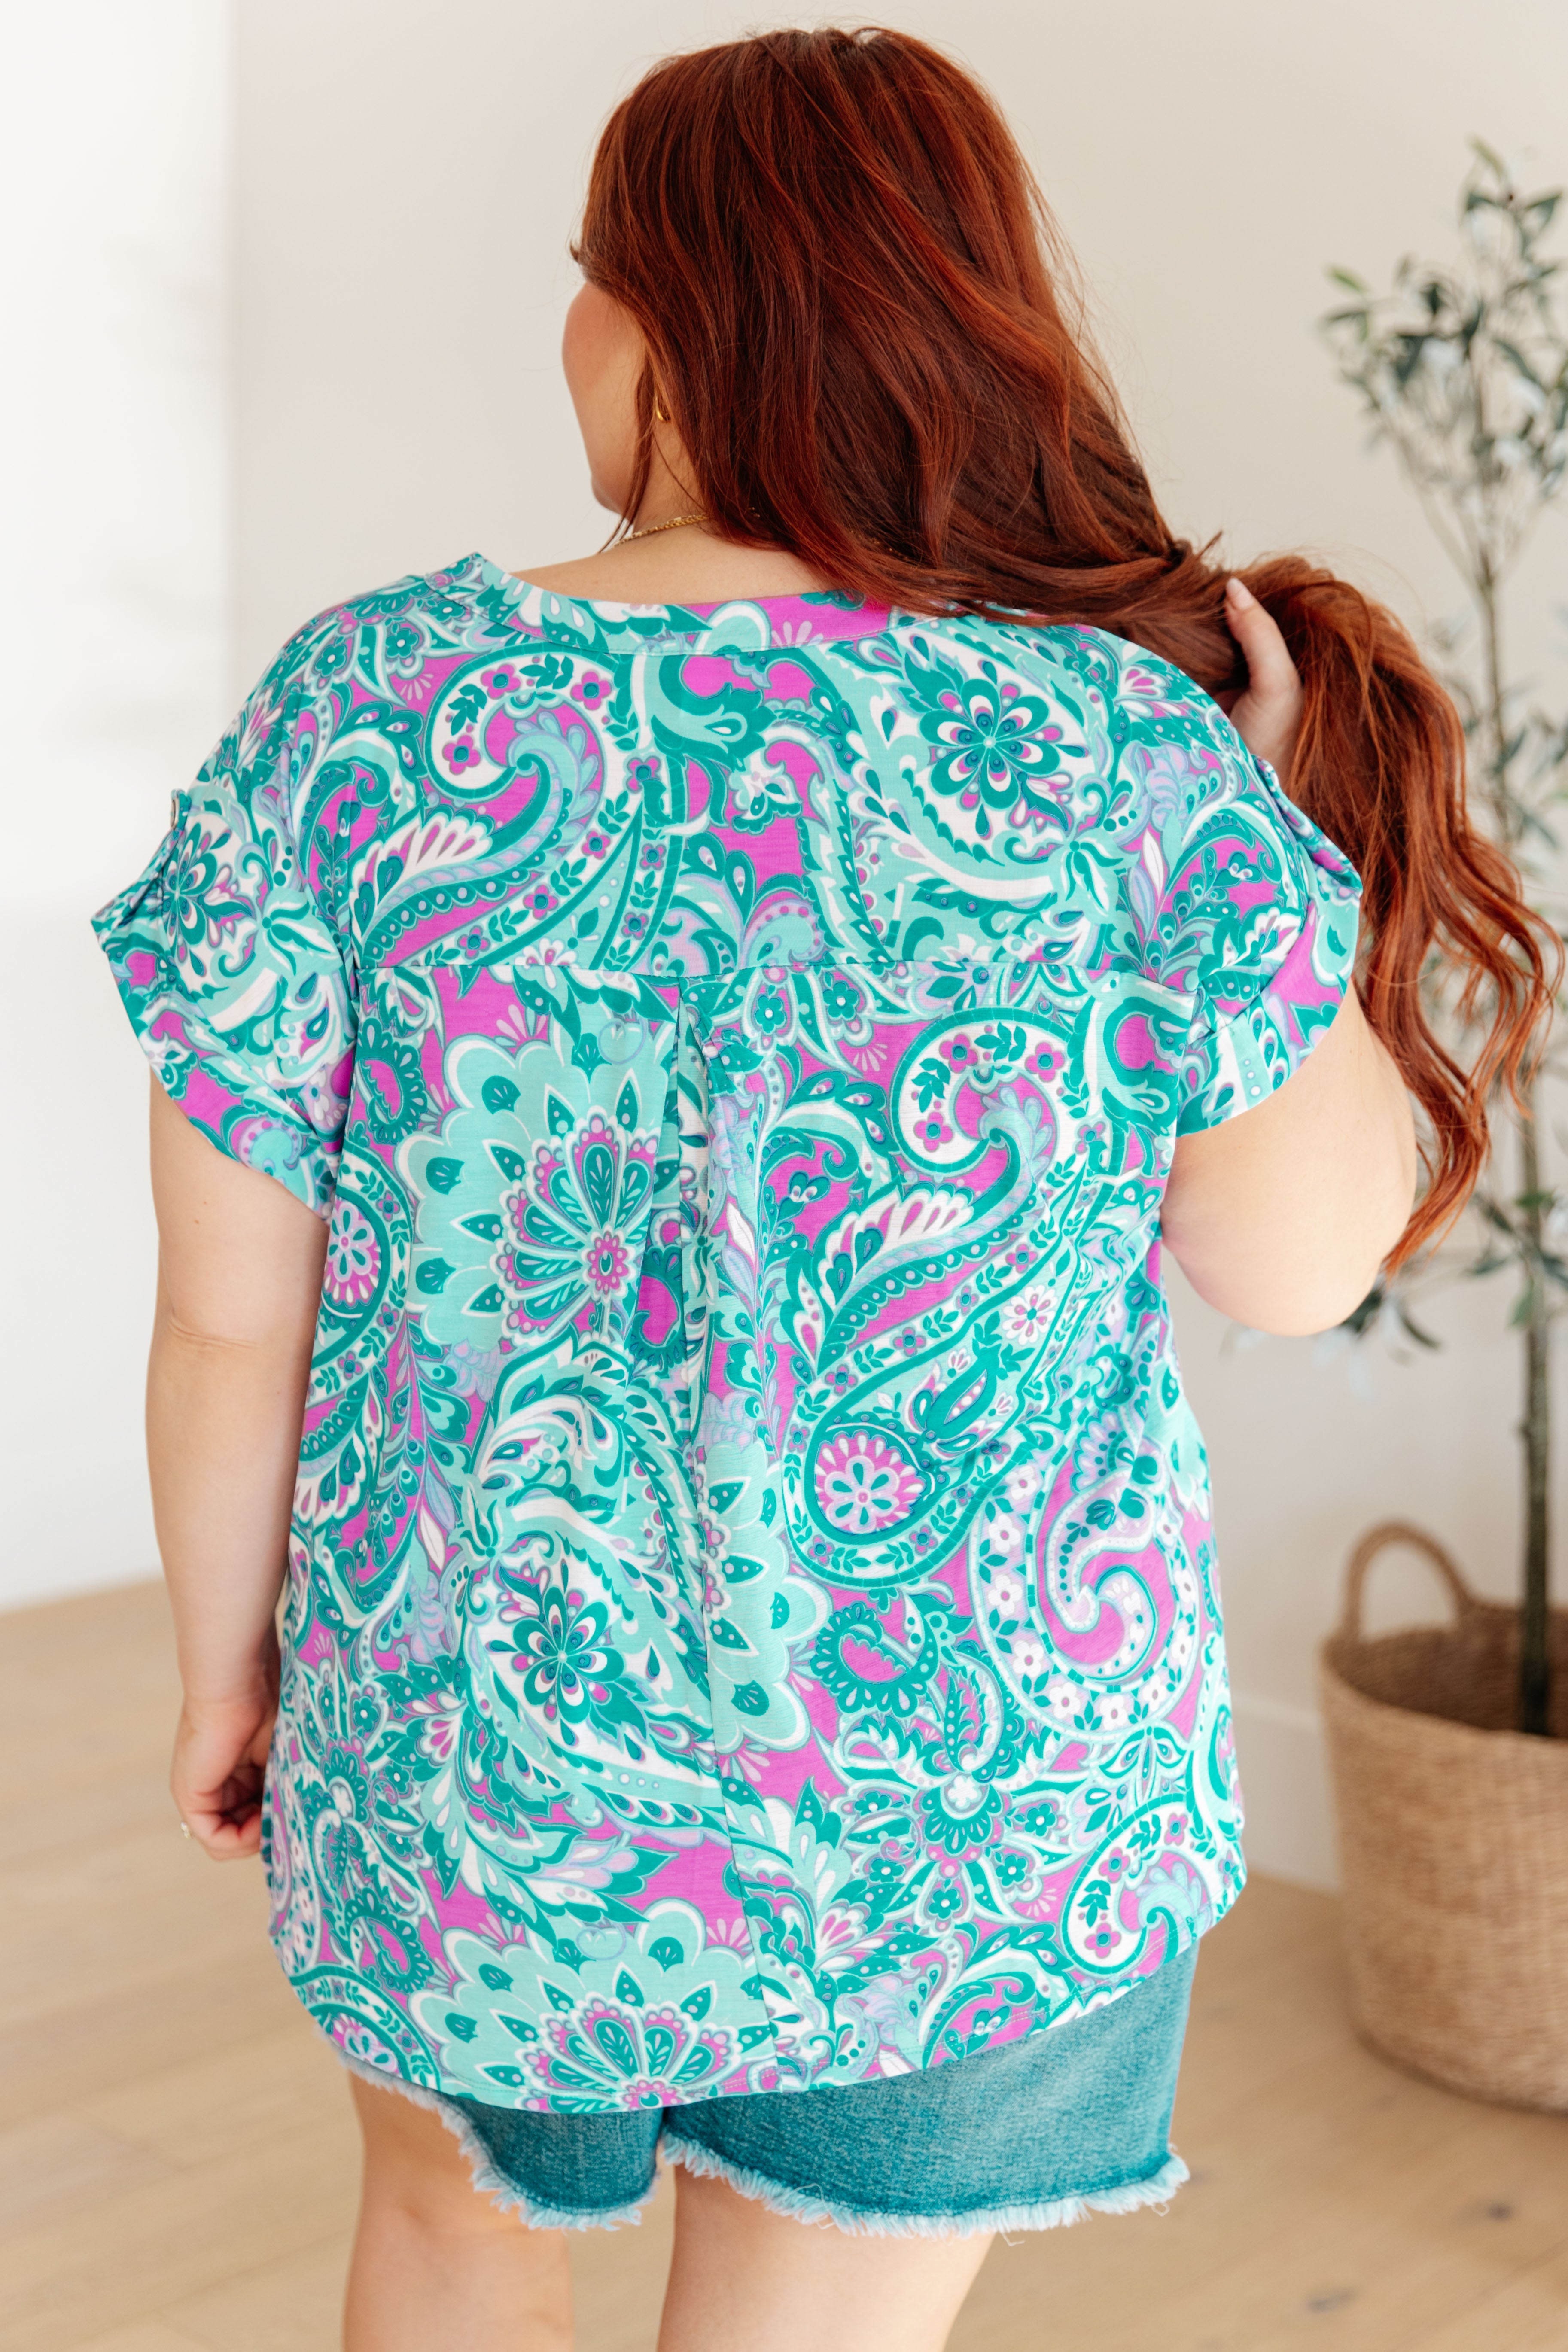 Lizzy Cap Sleeve Top in Magenta and Teal Paisley Womens Ave Shops   